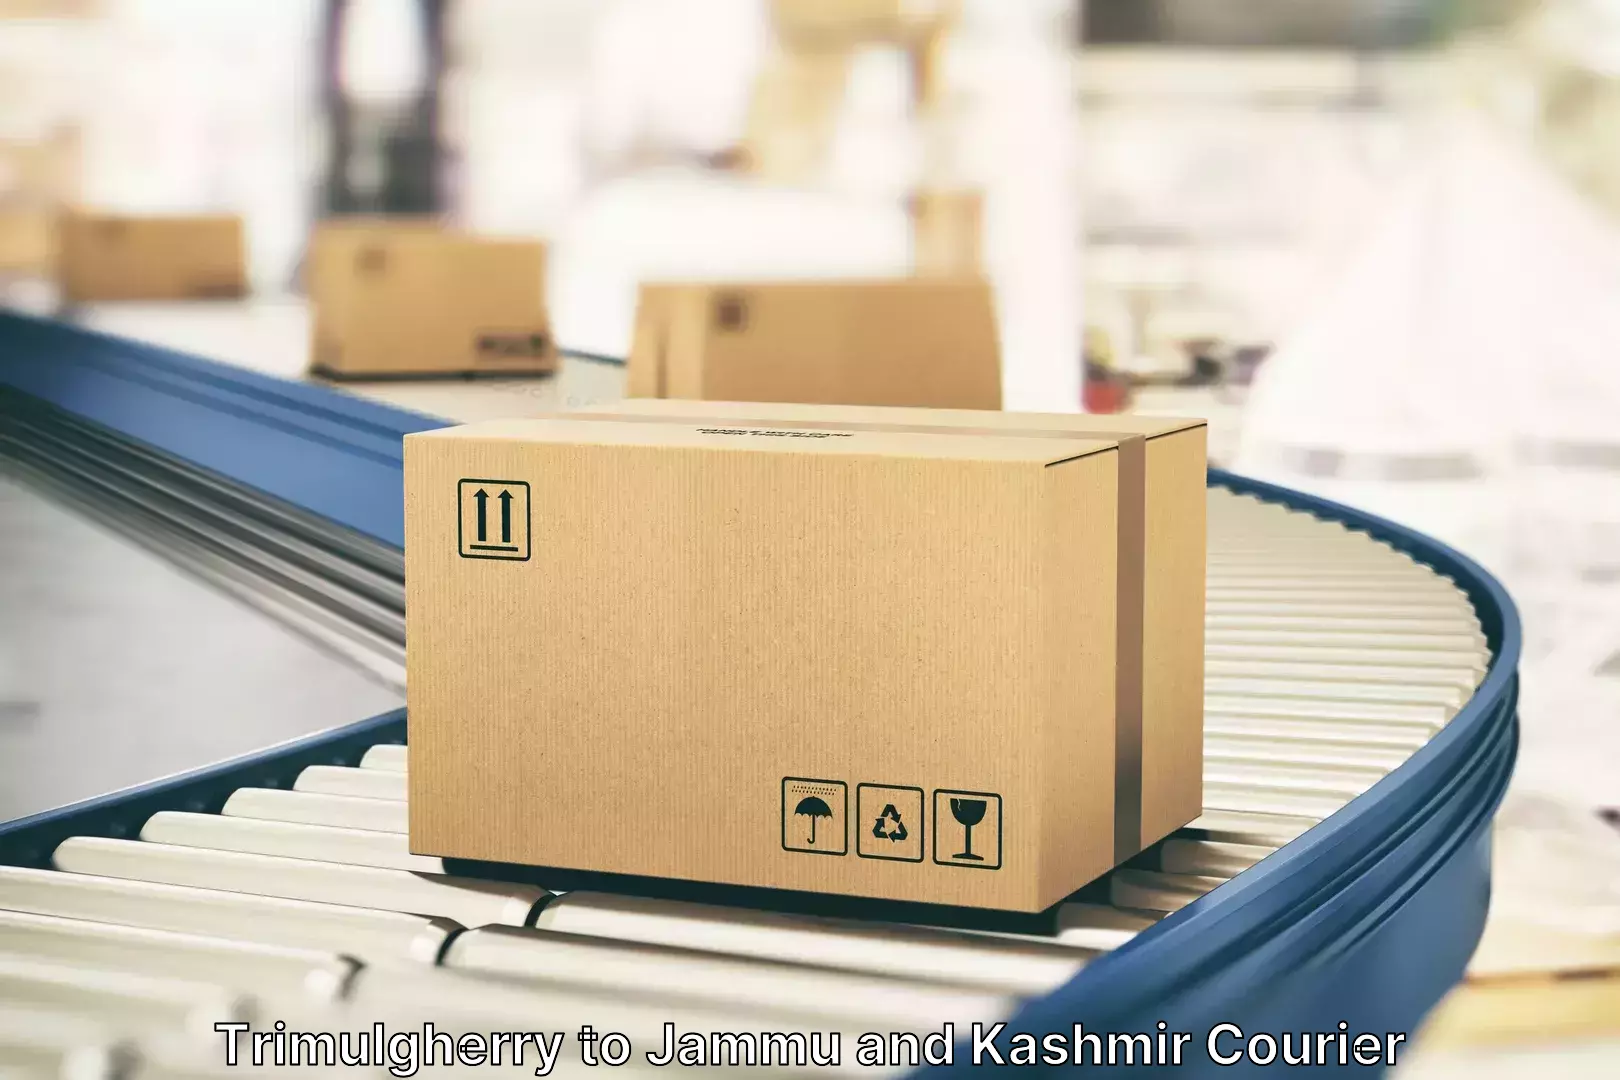 Luggage delivery logistics Trimulgherry to Jammu